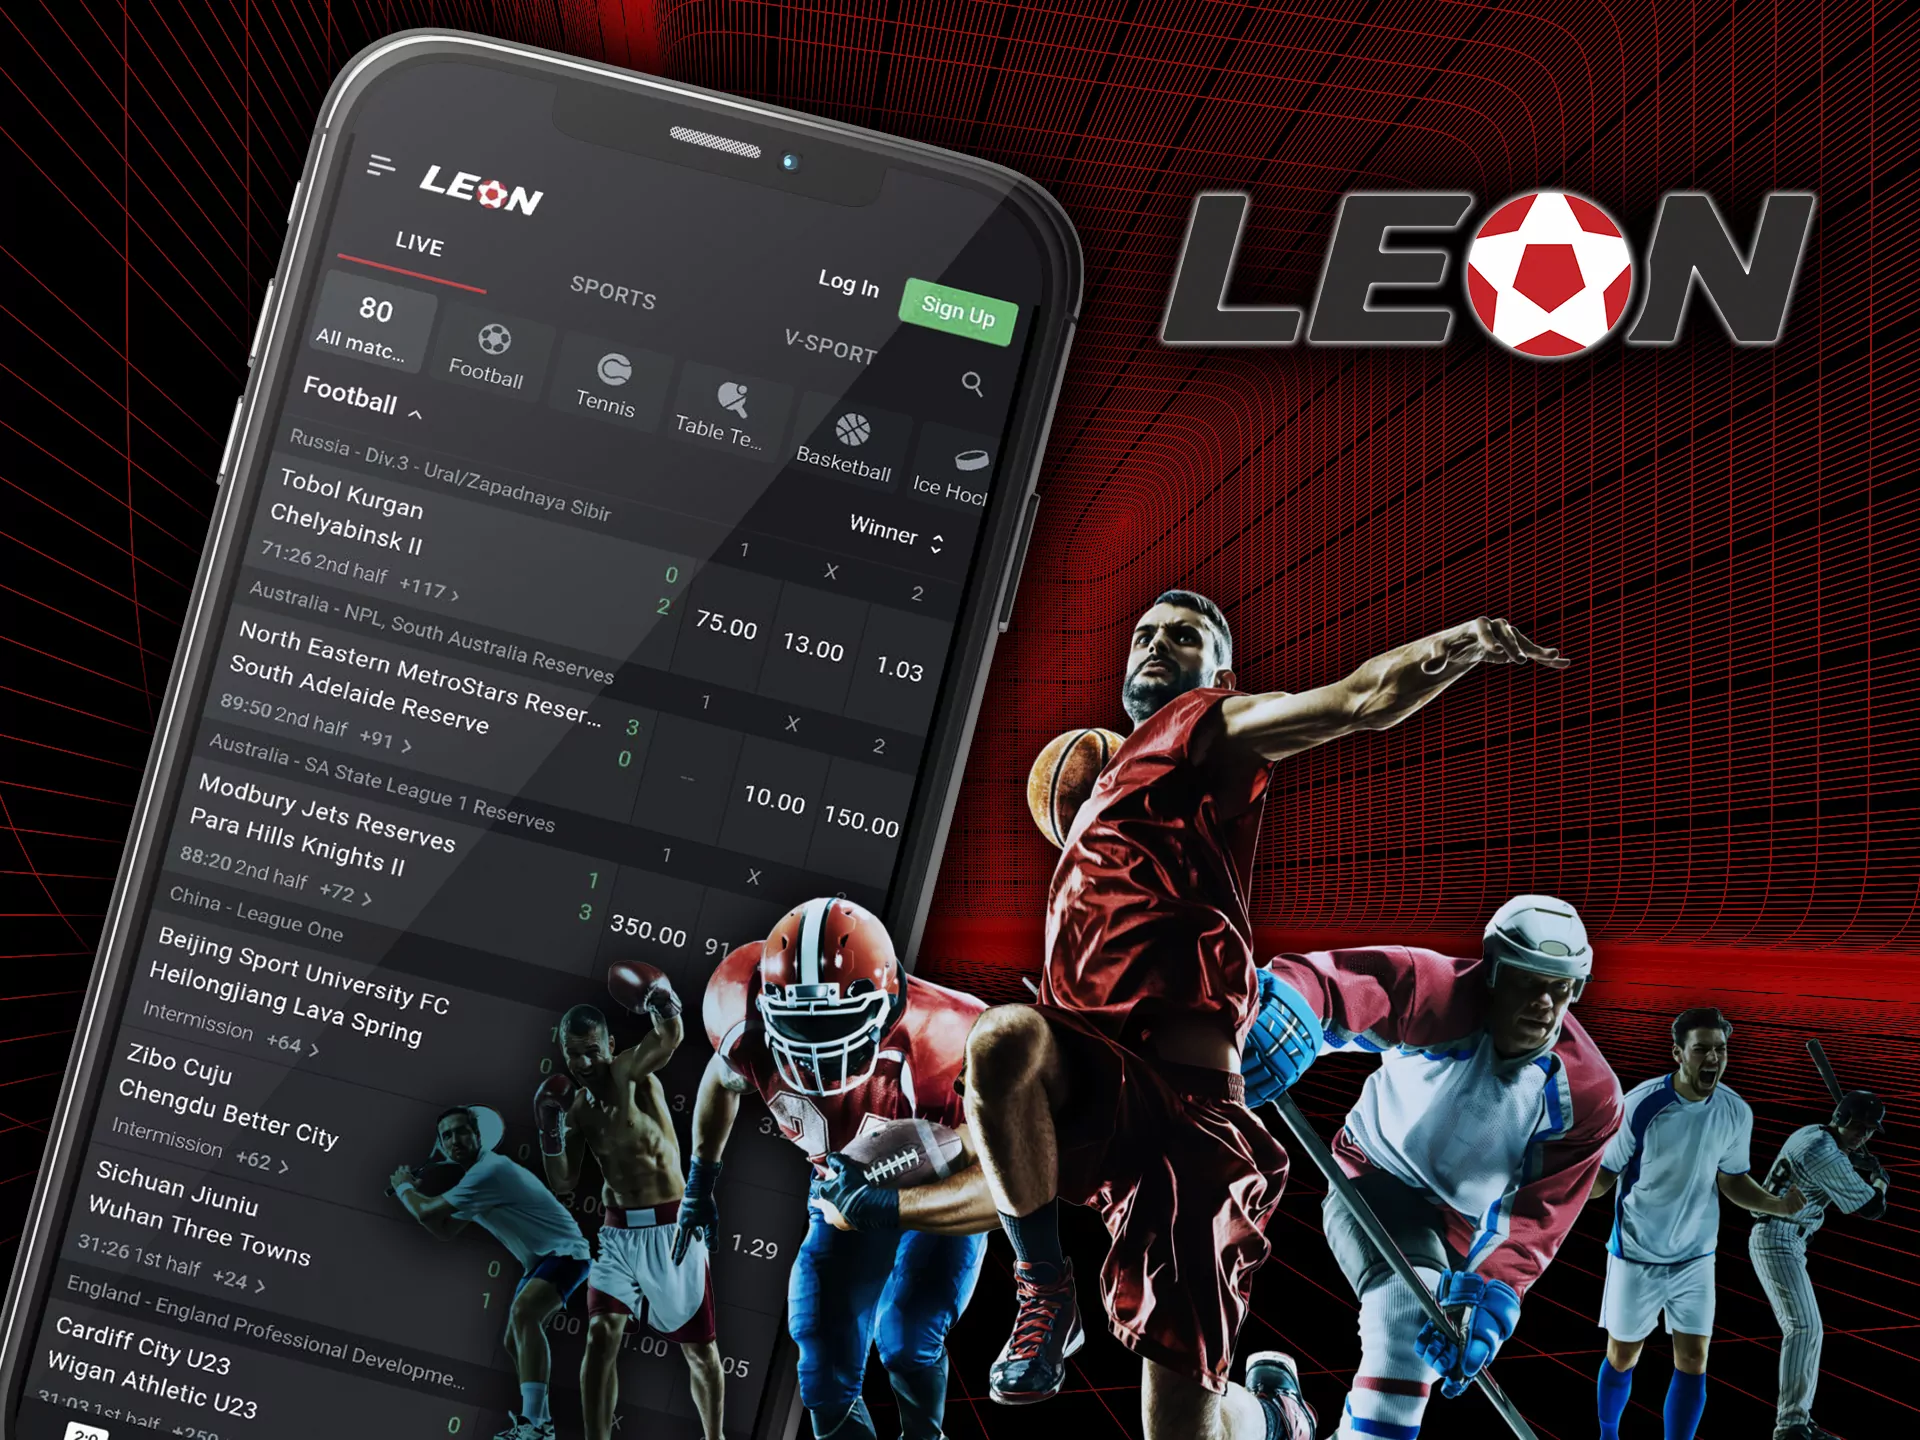 Leon app allows you plecing bets on various sports and e-sports events.